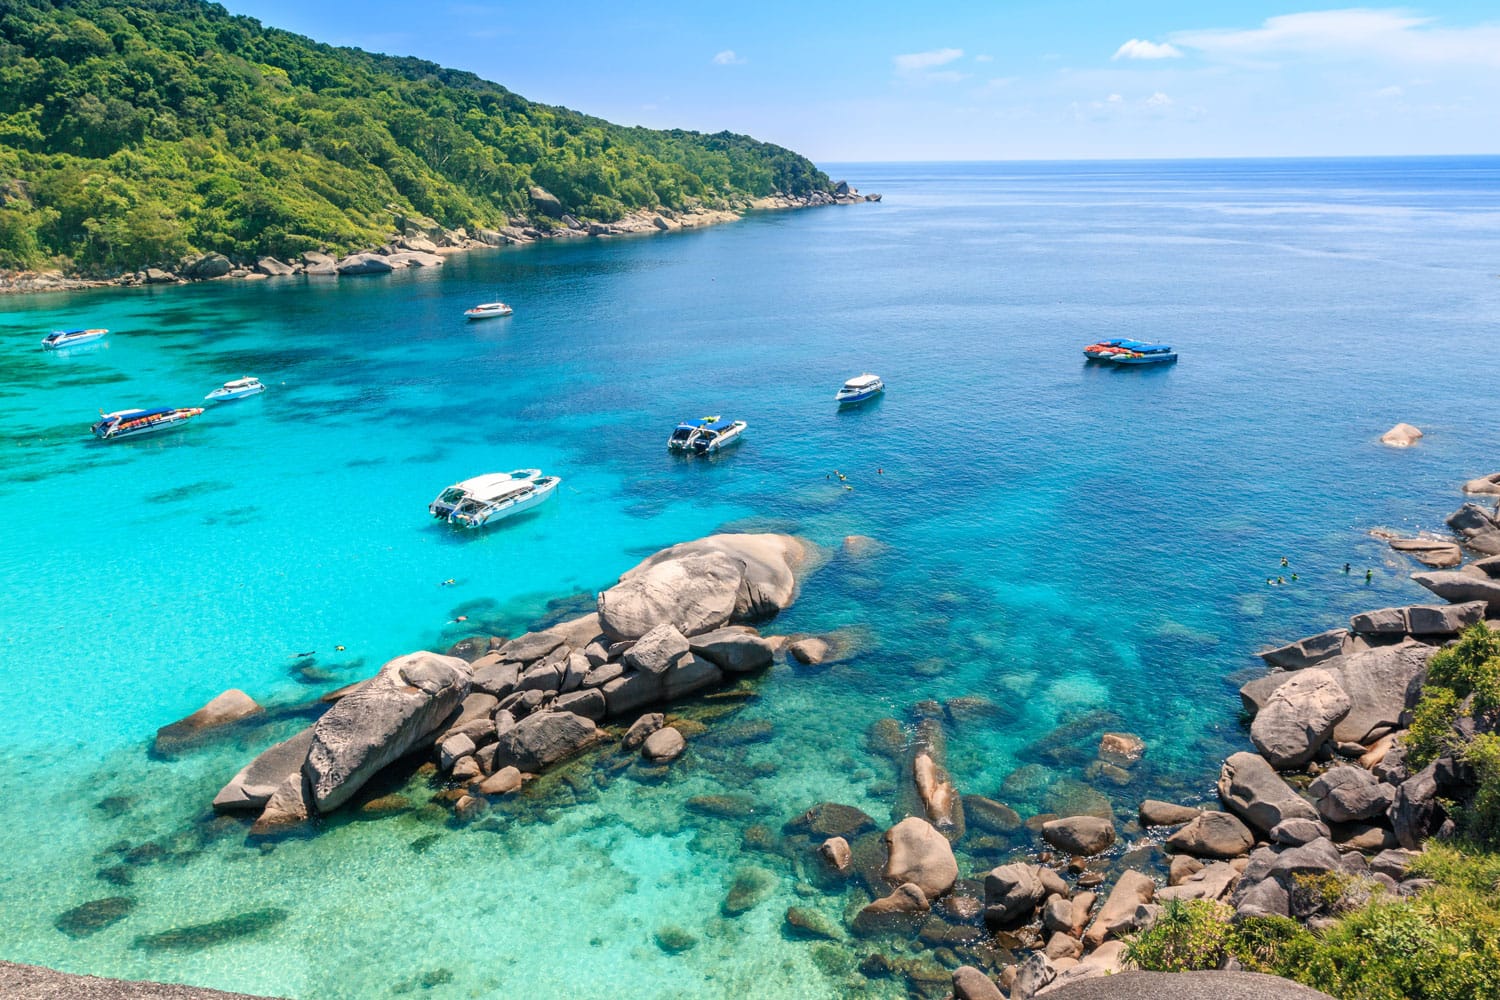 Top view of Similan Island National Park on Andaman sea in Thailand.